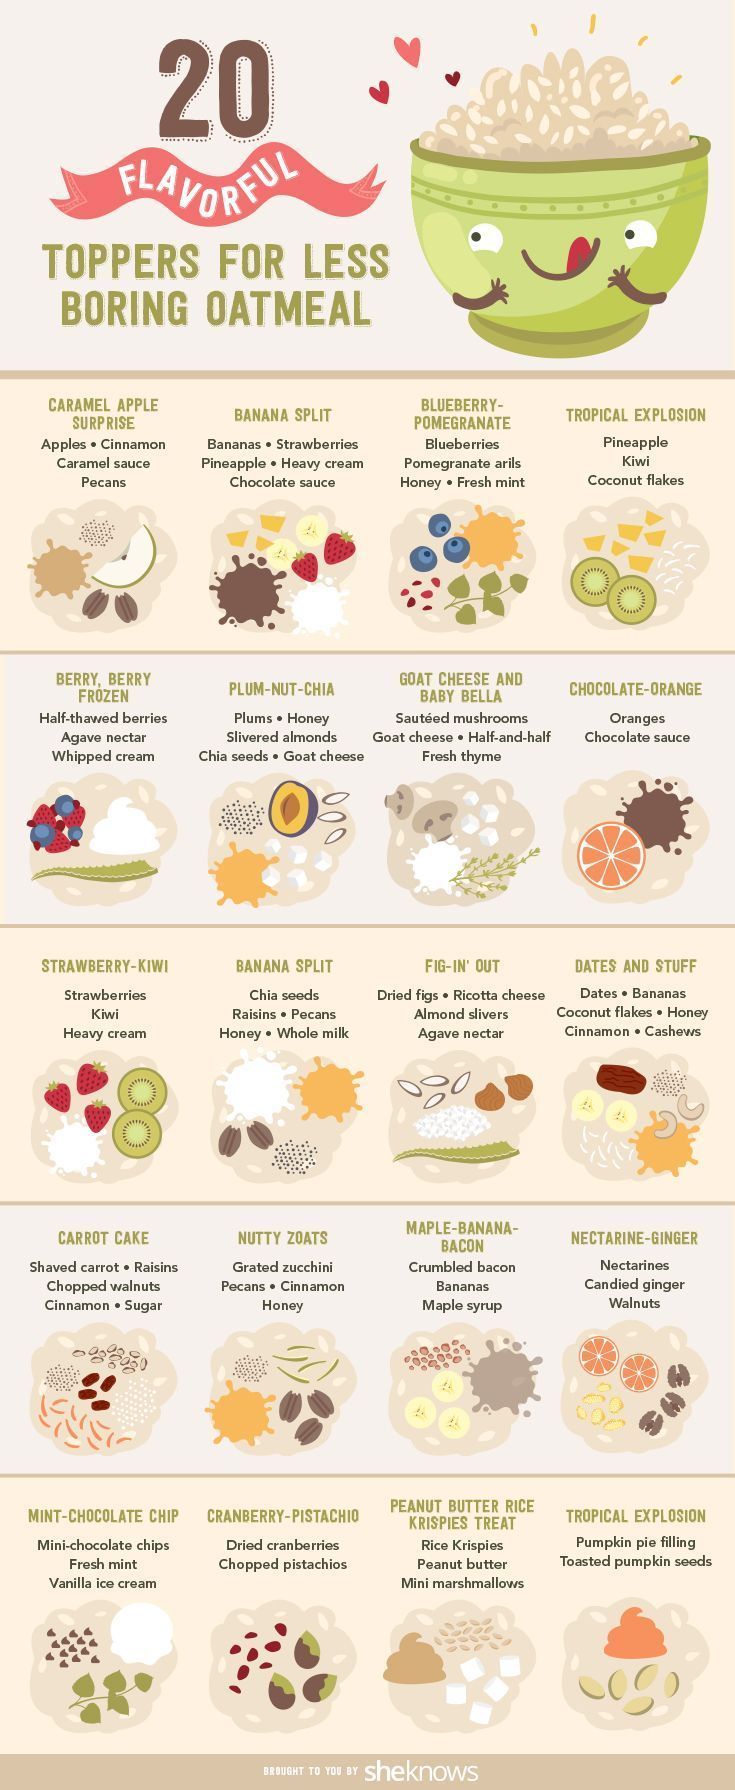 This oatmeal recipe guide has all the toppings you could think of for your breakfast. Oatmeal will never be boring again!